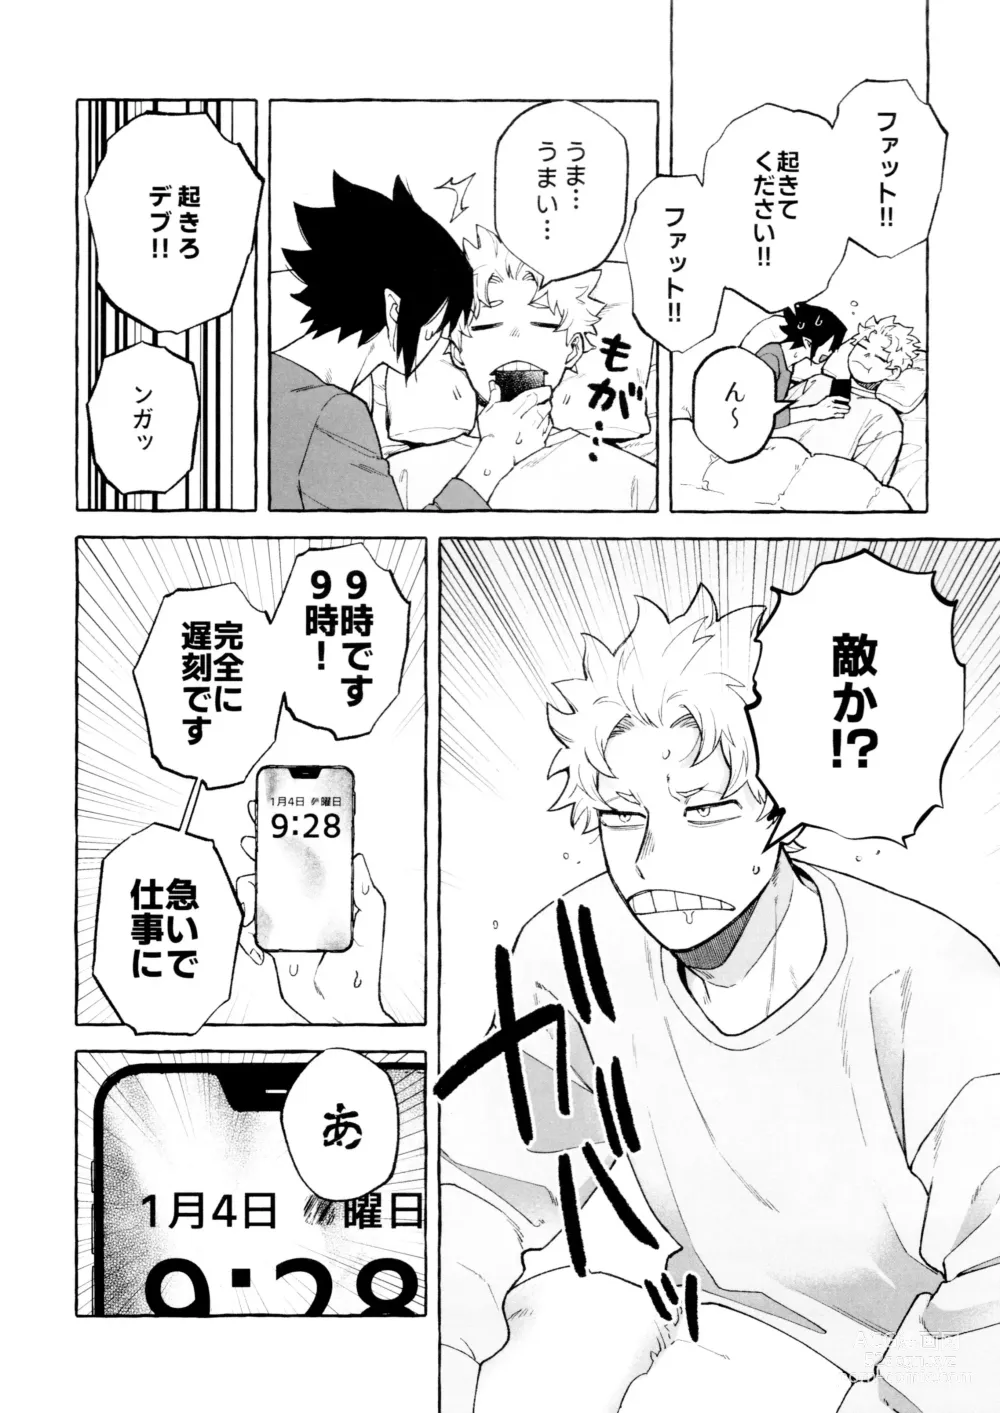 Page 4 of doujinshi Please please